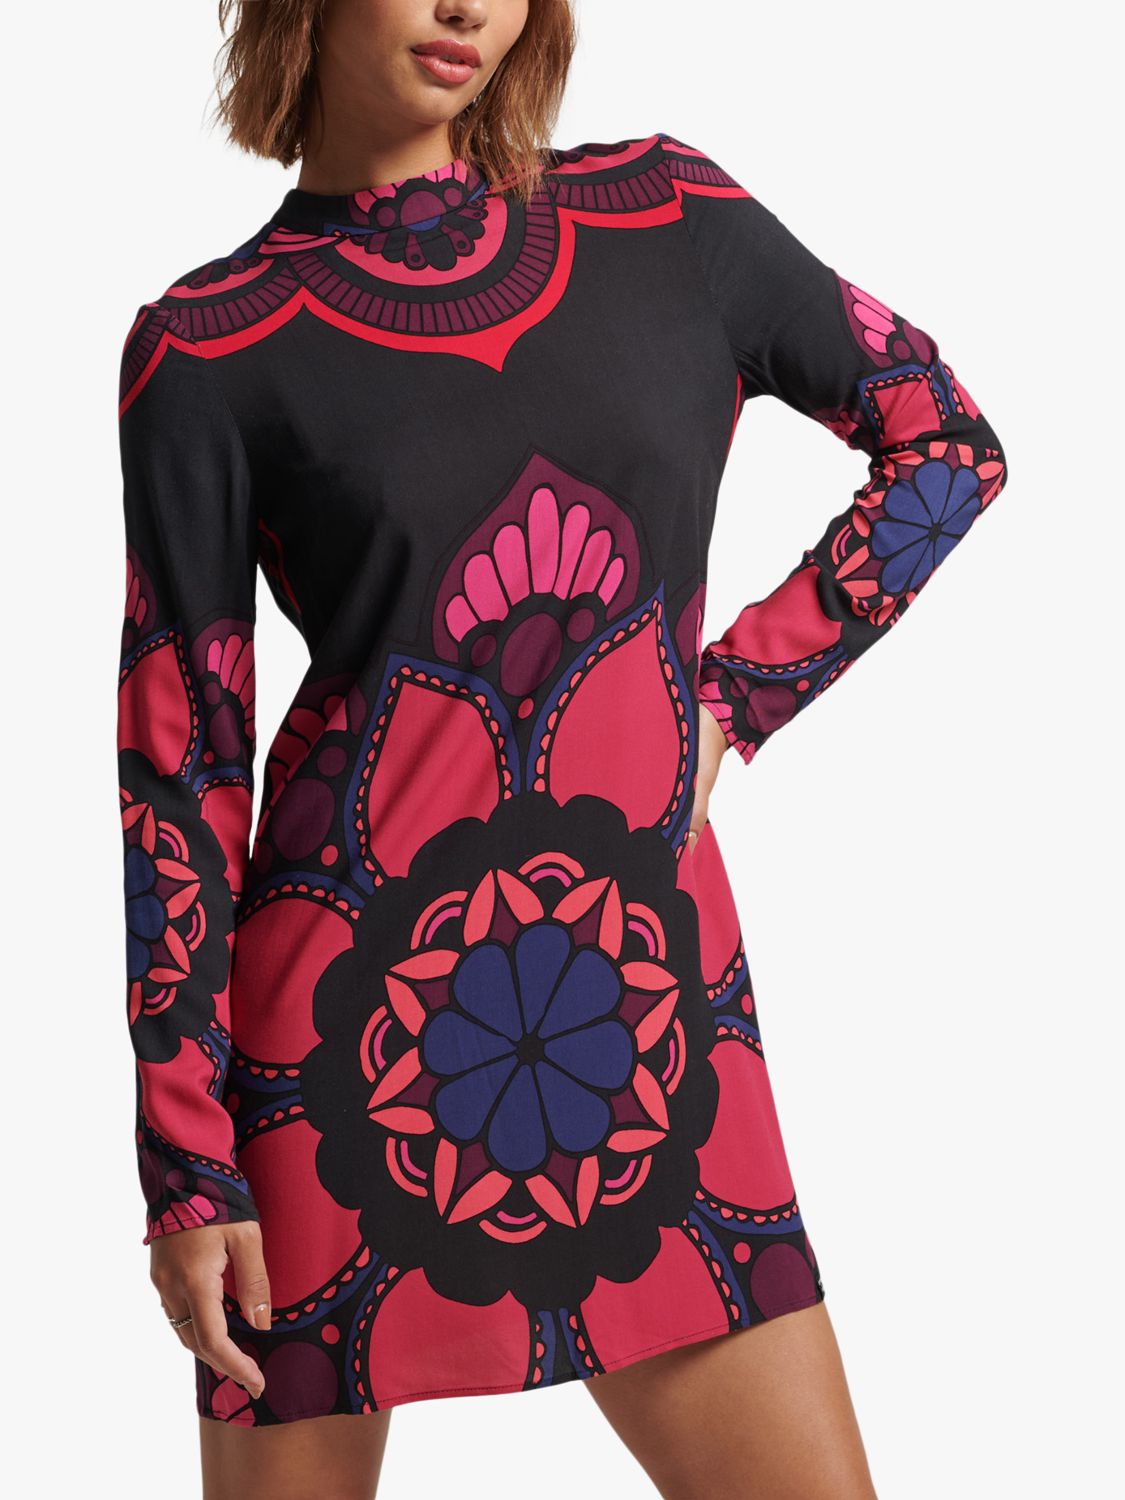 Superdry Long Sleeve Printed Mini Dress, Psychedelic, 8